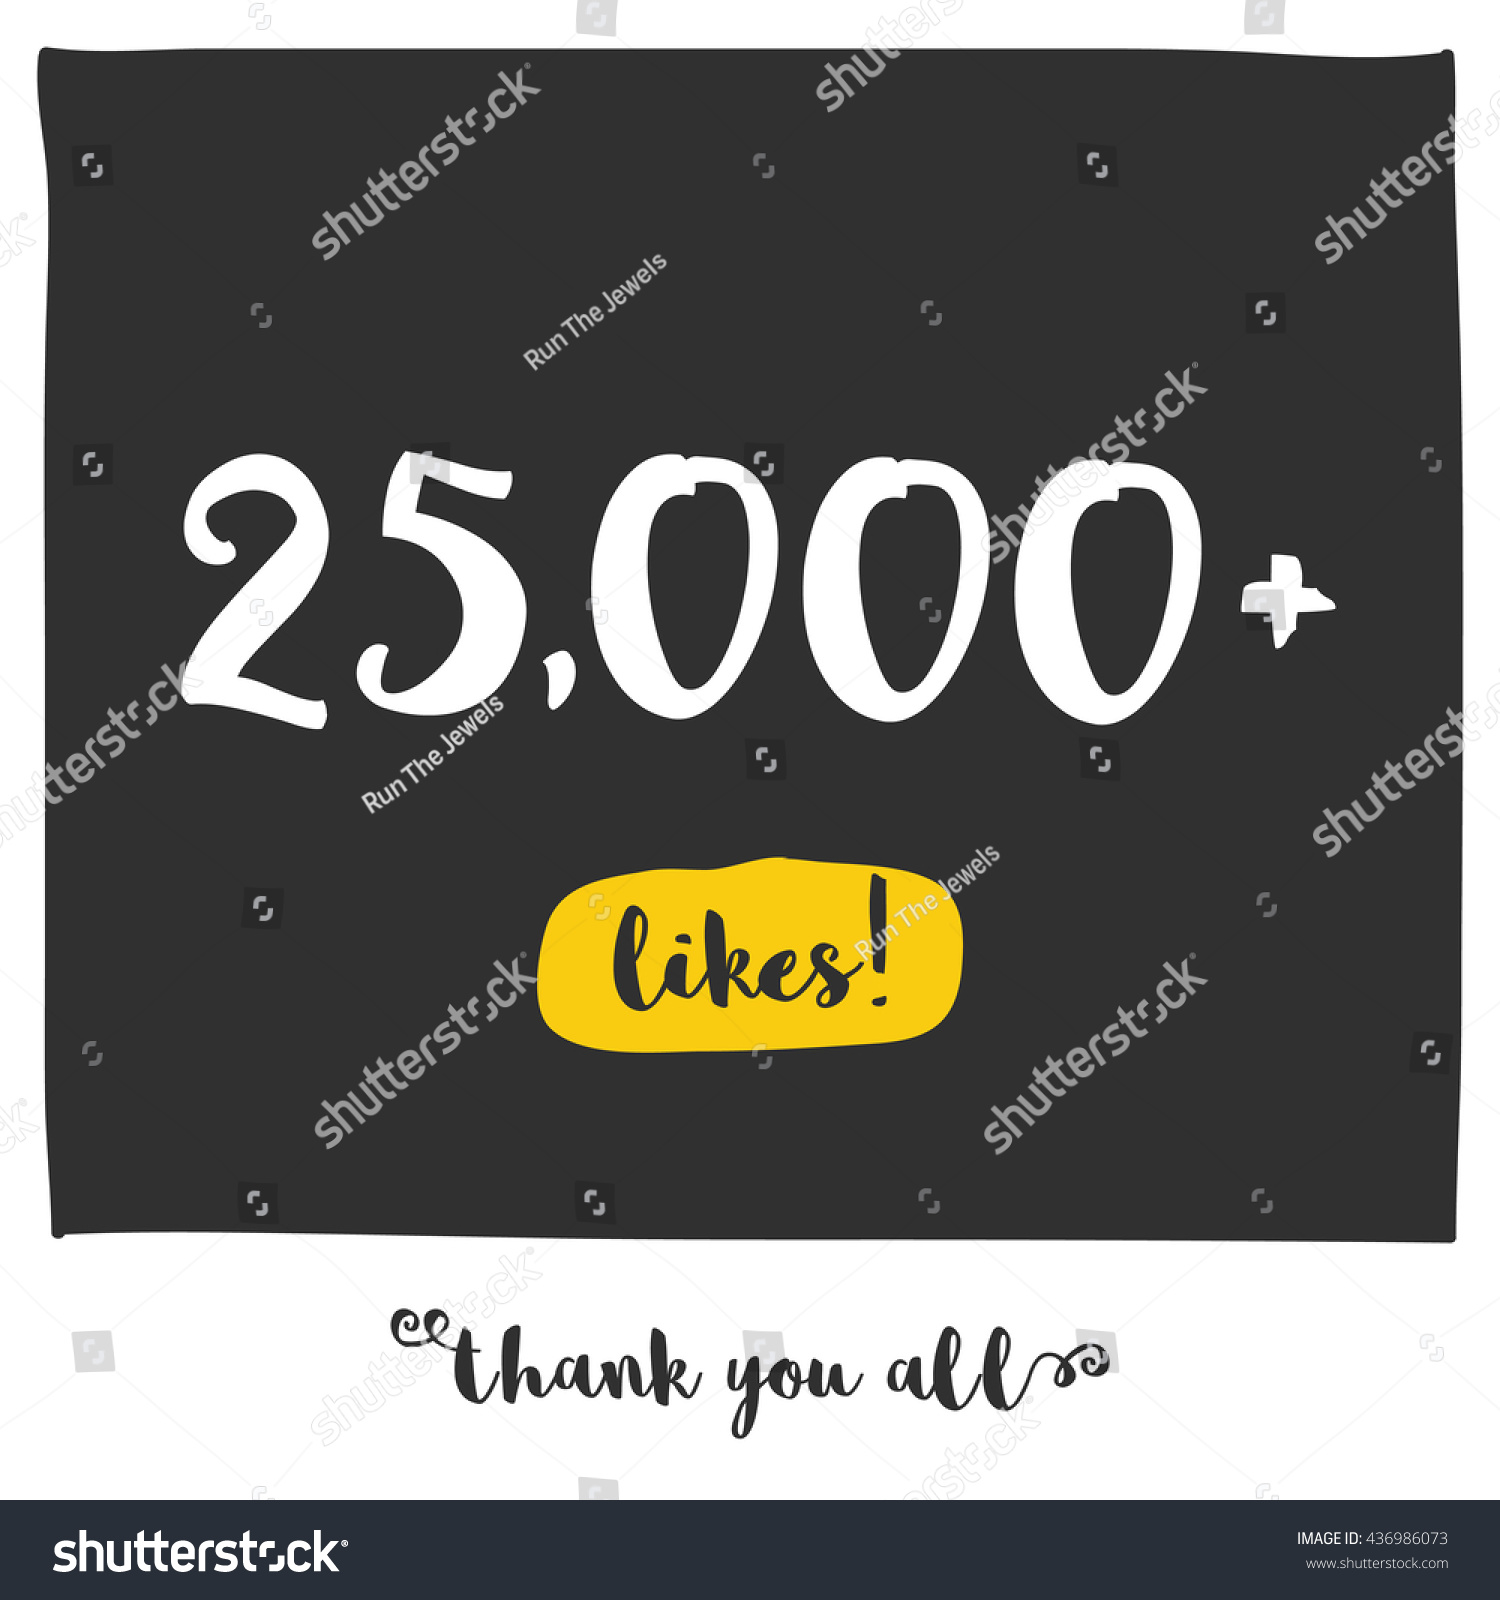 SVG of Thank You All For 25000 Likes! (Vector Design Template For Social Networks Thanking a Large Number of Subscribers or Followers) svg